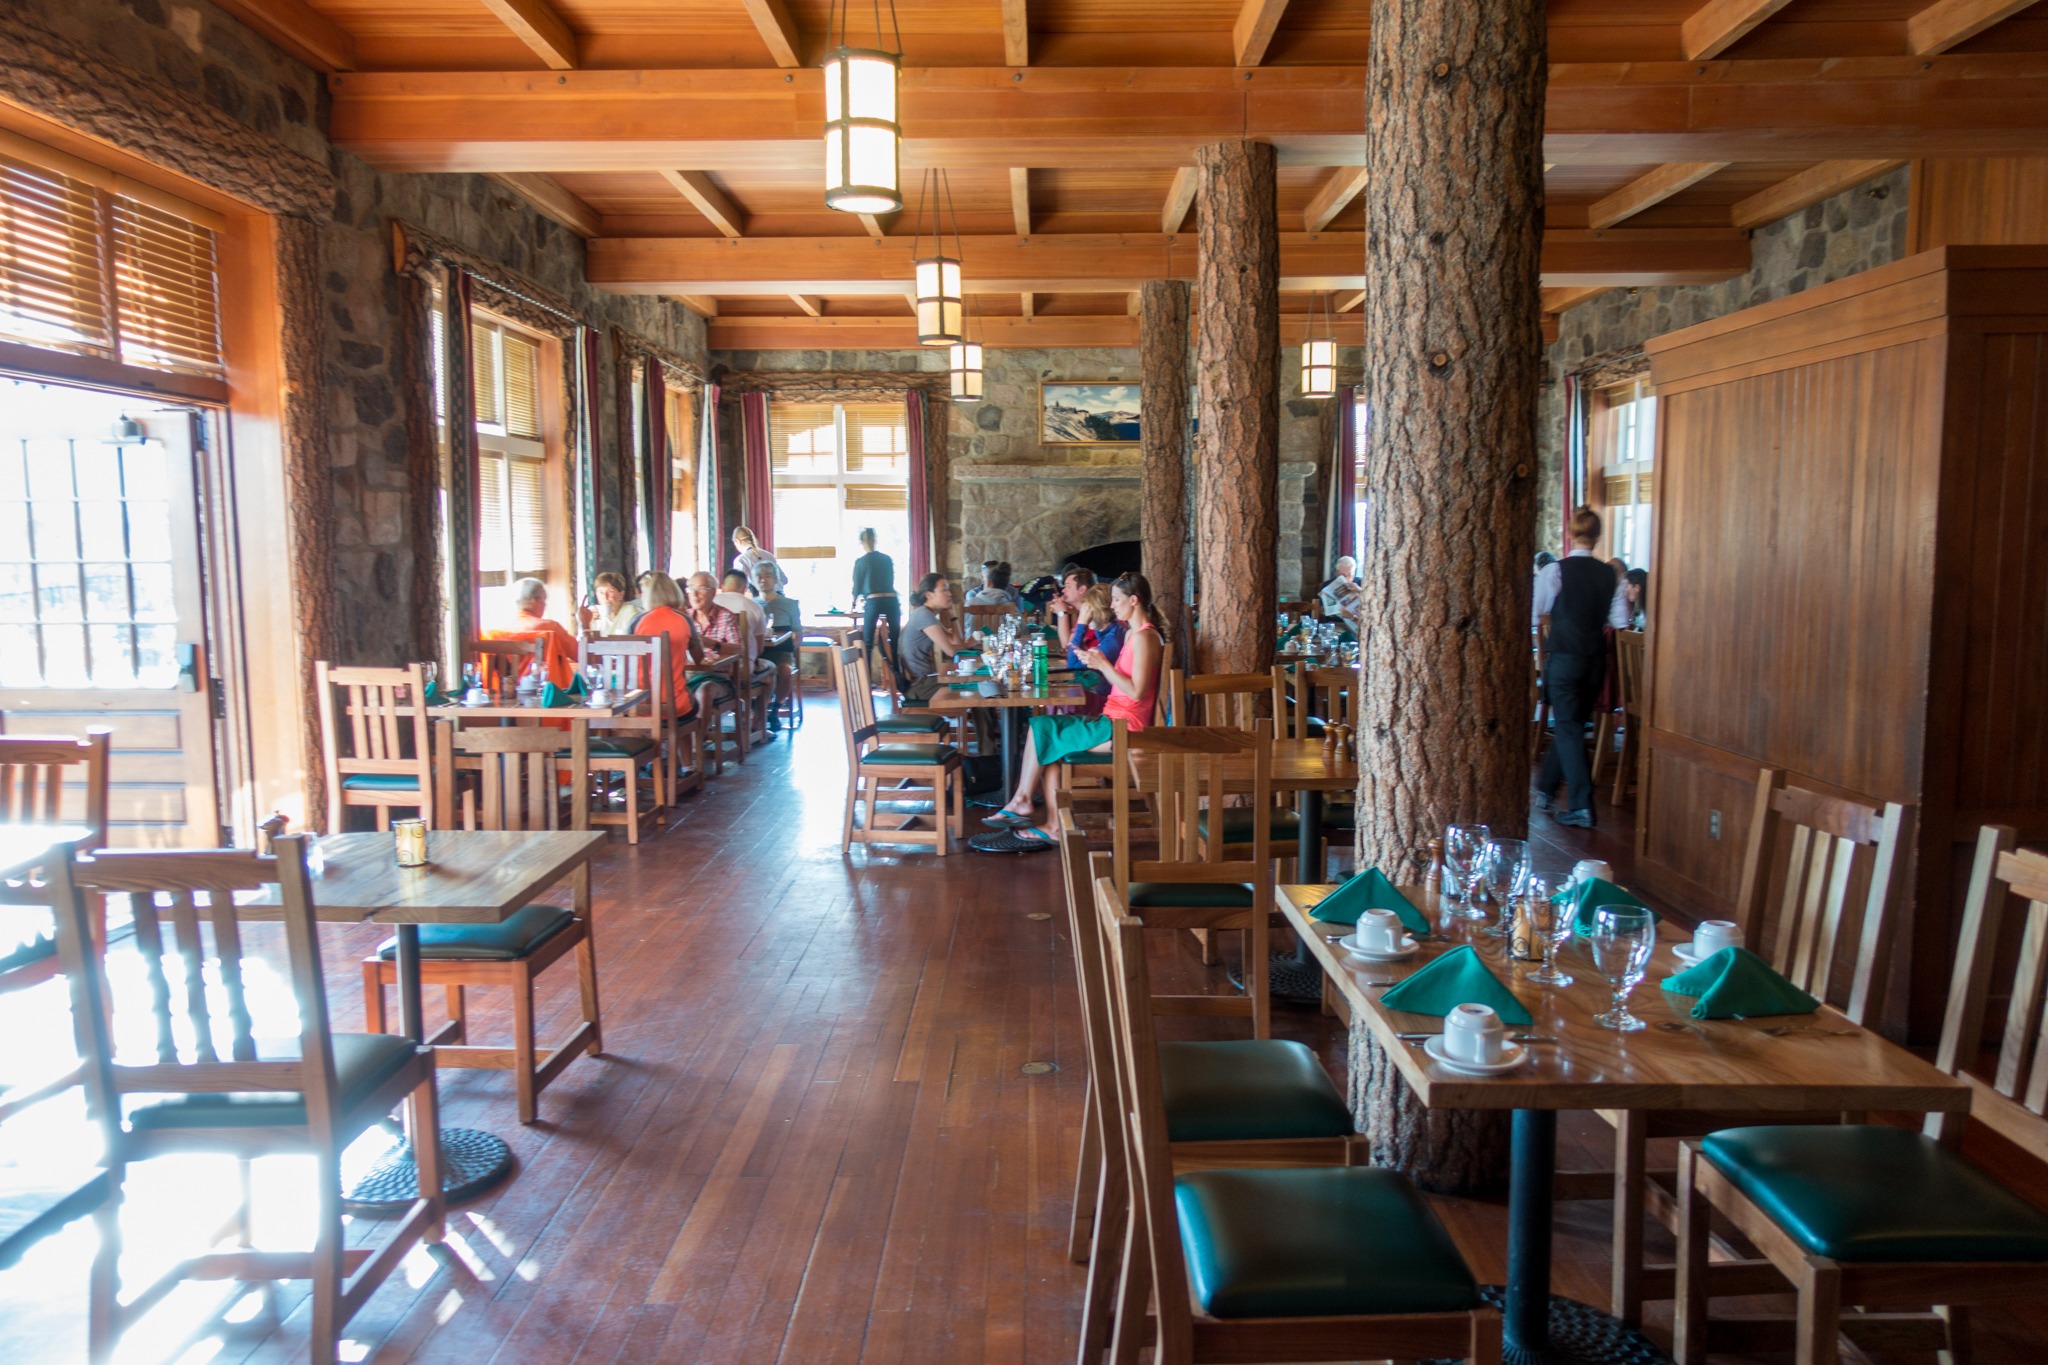 Crater Lake Lodge Dining Room Dress Code